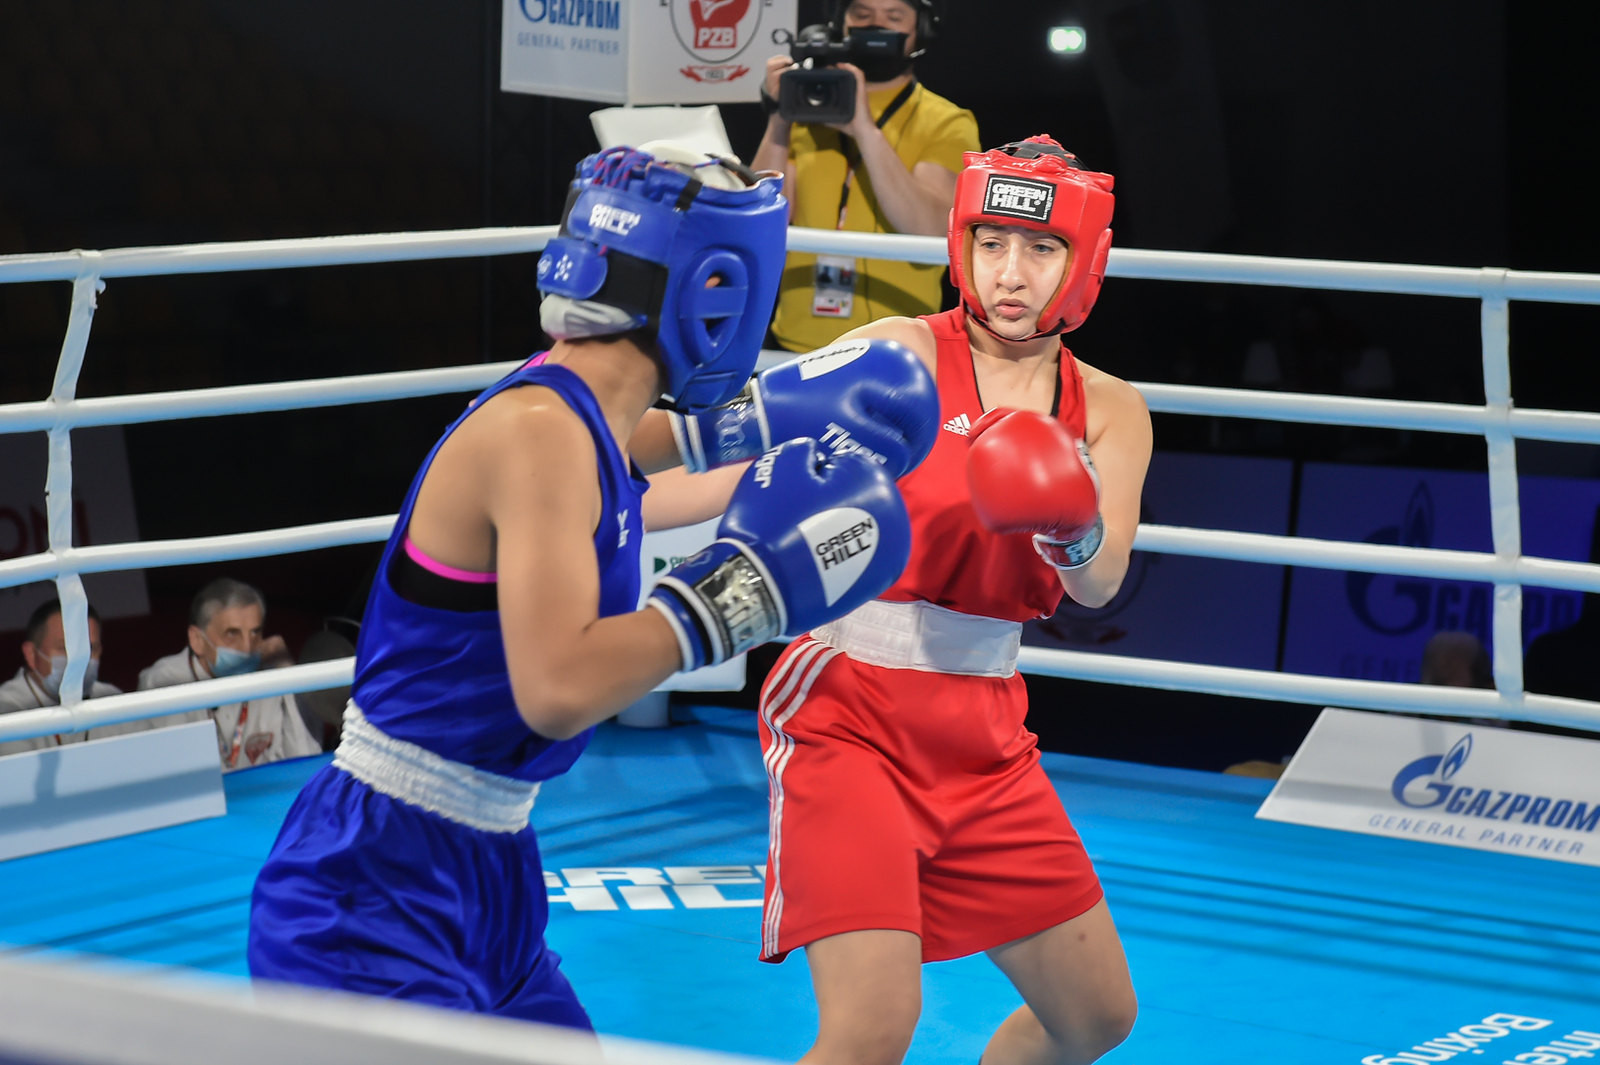 Action is taking place at the Hala Legionow Sports Complex in Kielce, Poland, with the competition scheduled to run until April 24 ©AIBA